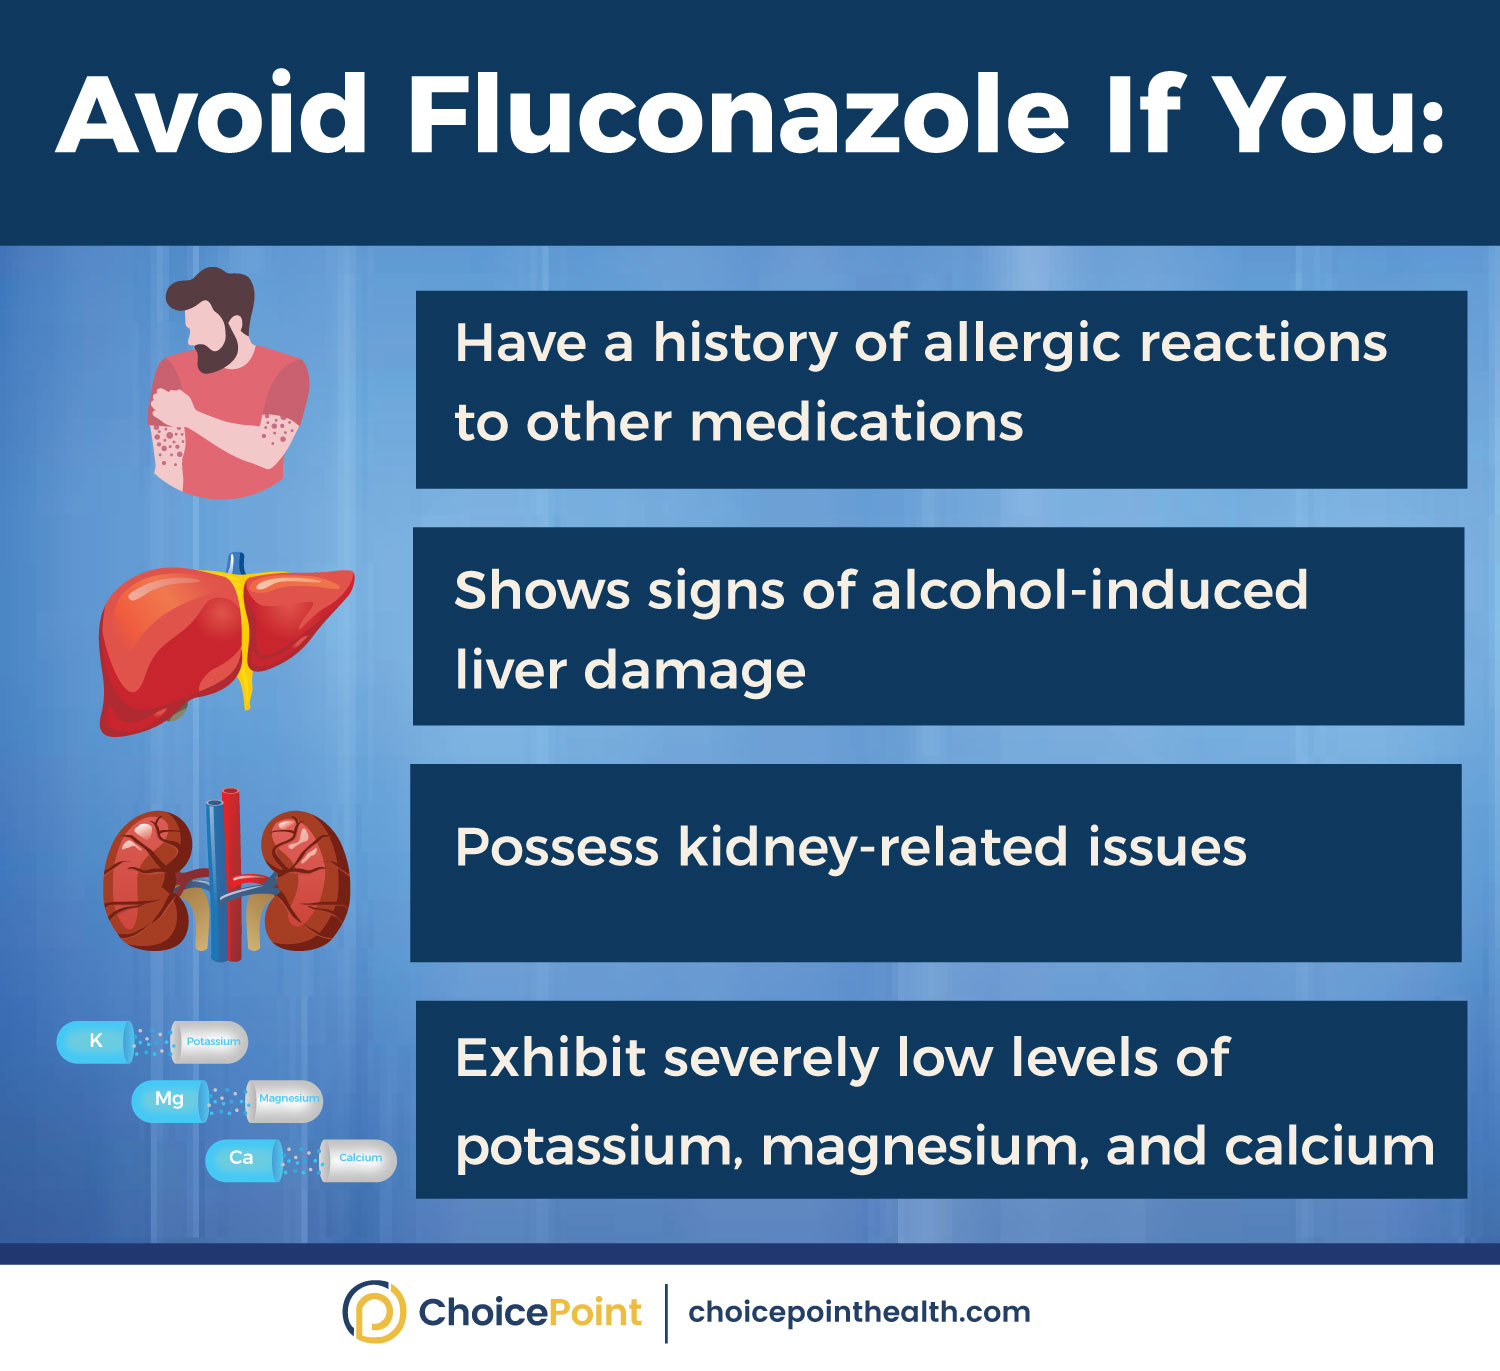 What Are the Cautions with Fluconazole?